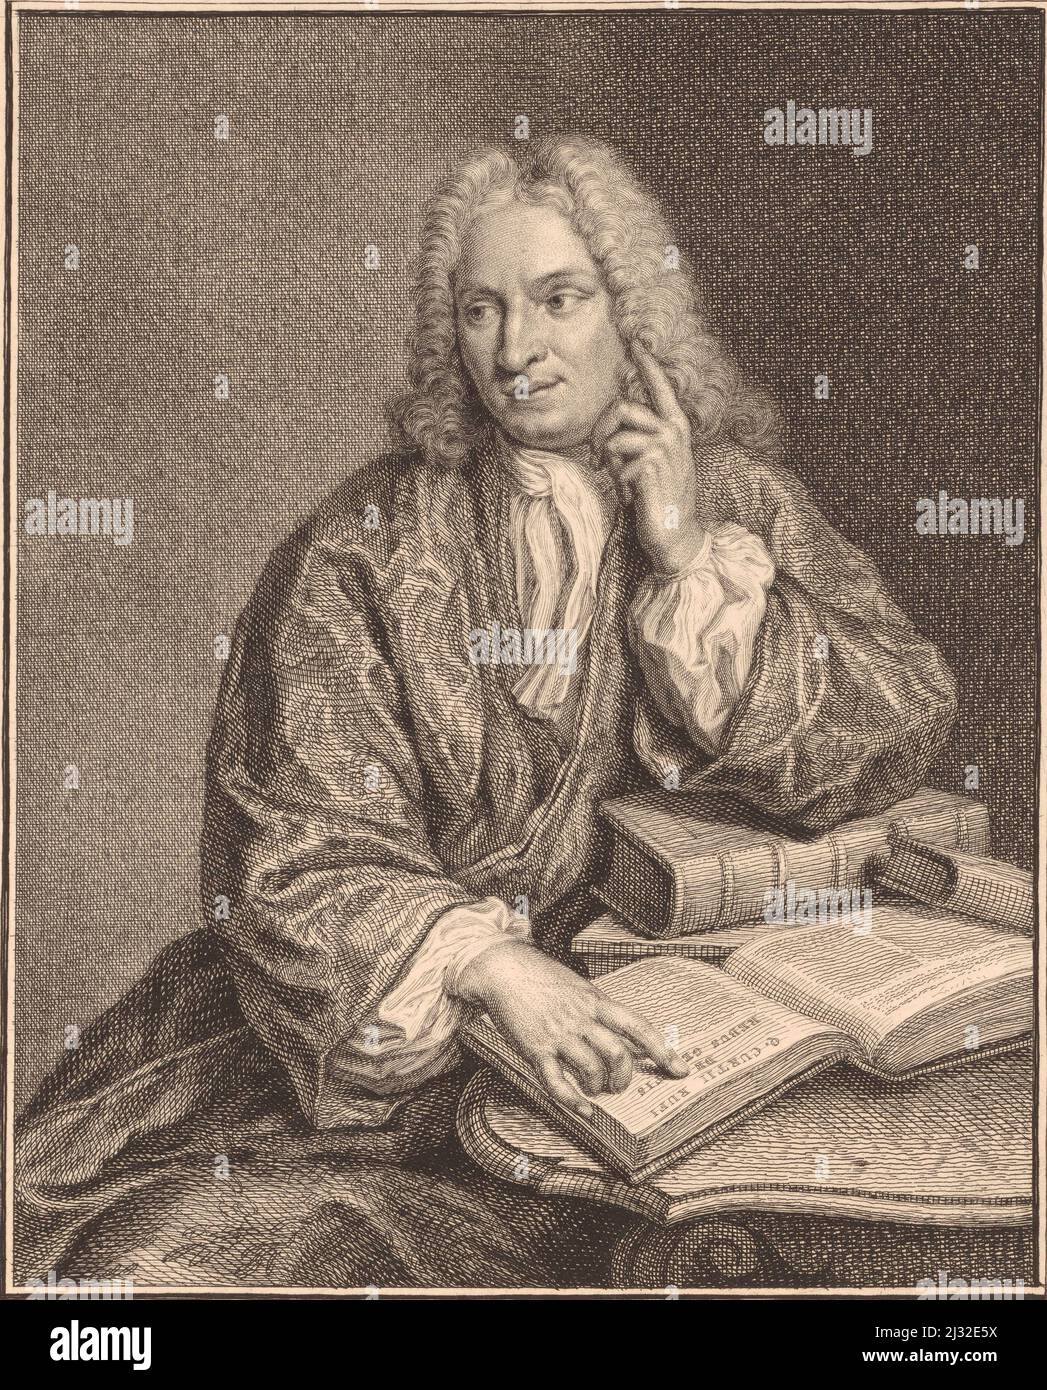 Hendrik  Snakenburg (Leiden, September 29, 1674 - January 16, 1750) was rector of the Latin School. Portrait by Jacob Houbraken . He made his name as a scholar by publishing Quinti Curtii Rufi De rebus gestis Alexandri Magni, regis Macedonum, libri superstites in 1724 by Samuel Luchtmans, with whom he was a friend. Stock Photo